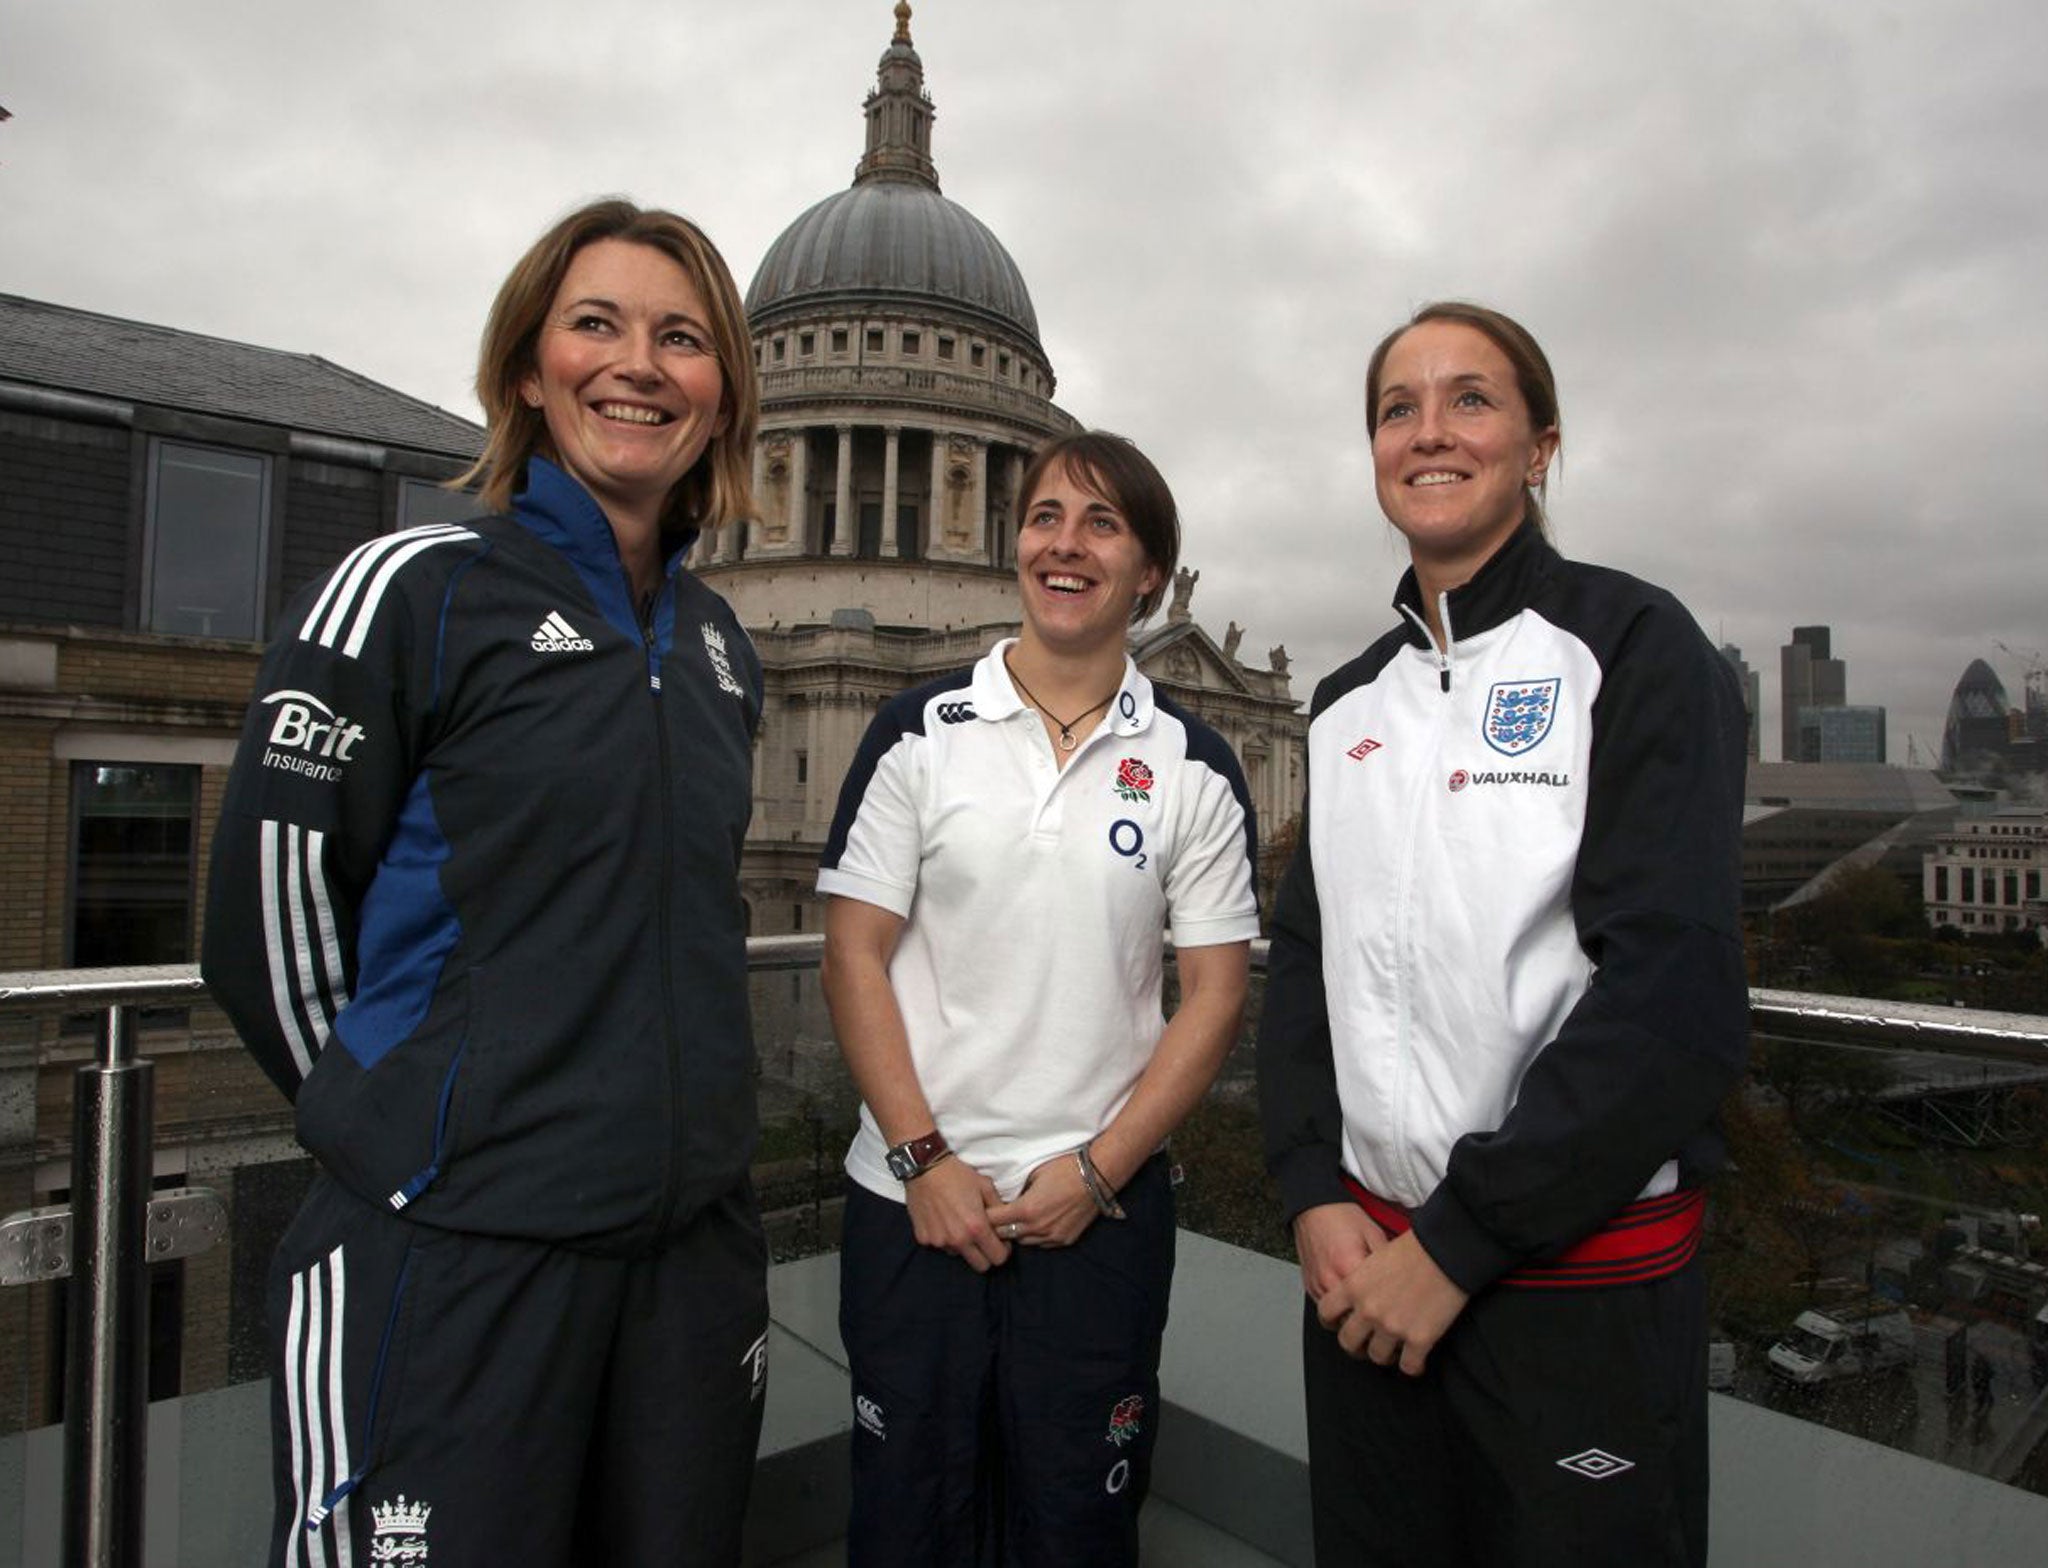 The three England captains (from left): Charlotte Edwards (cricket), Katy McLean (rugby) and Casey Stoney (football) at the Grange St Paul’s Hotel in London this week